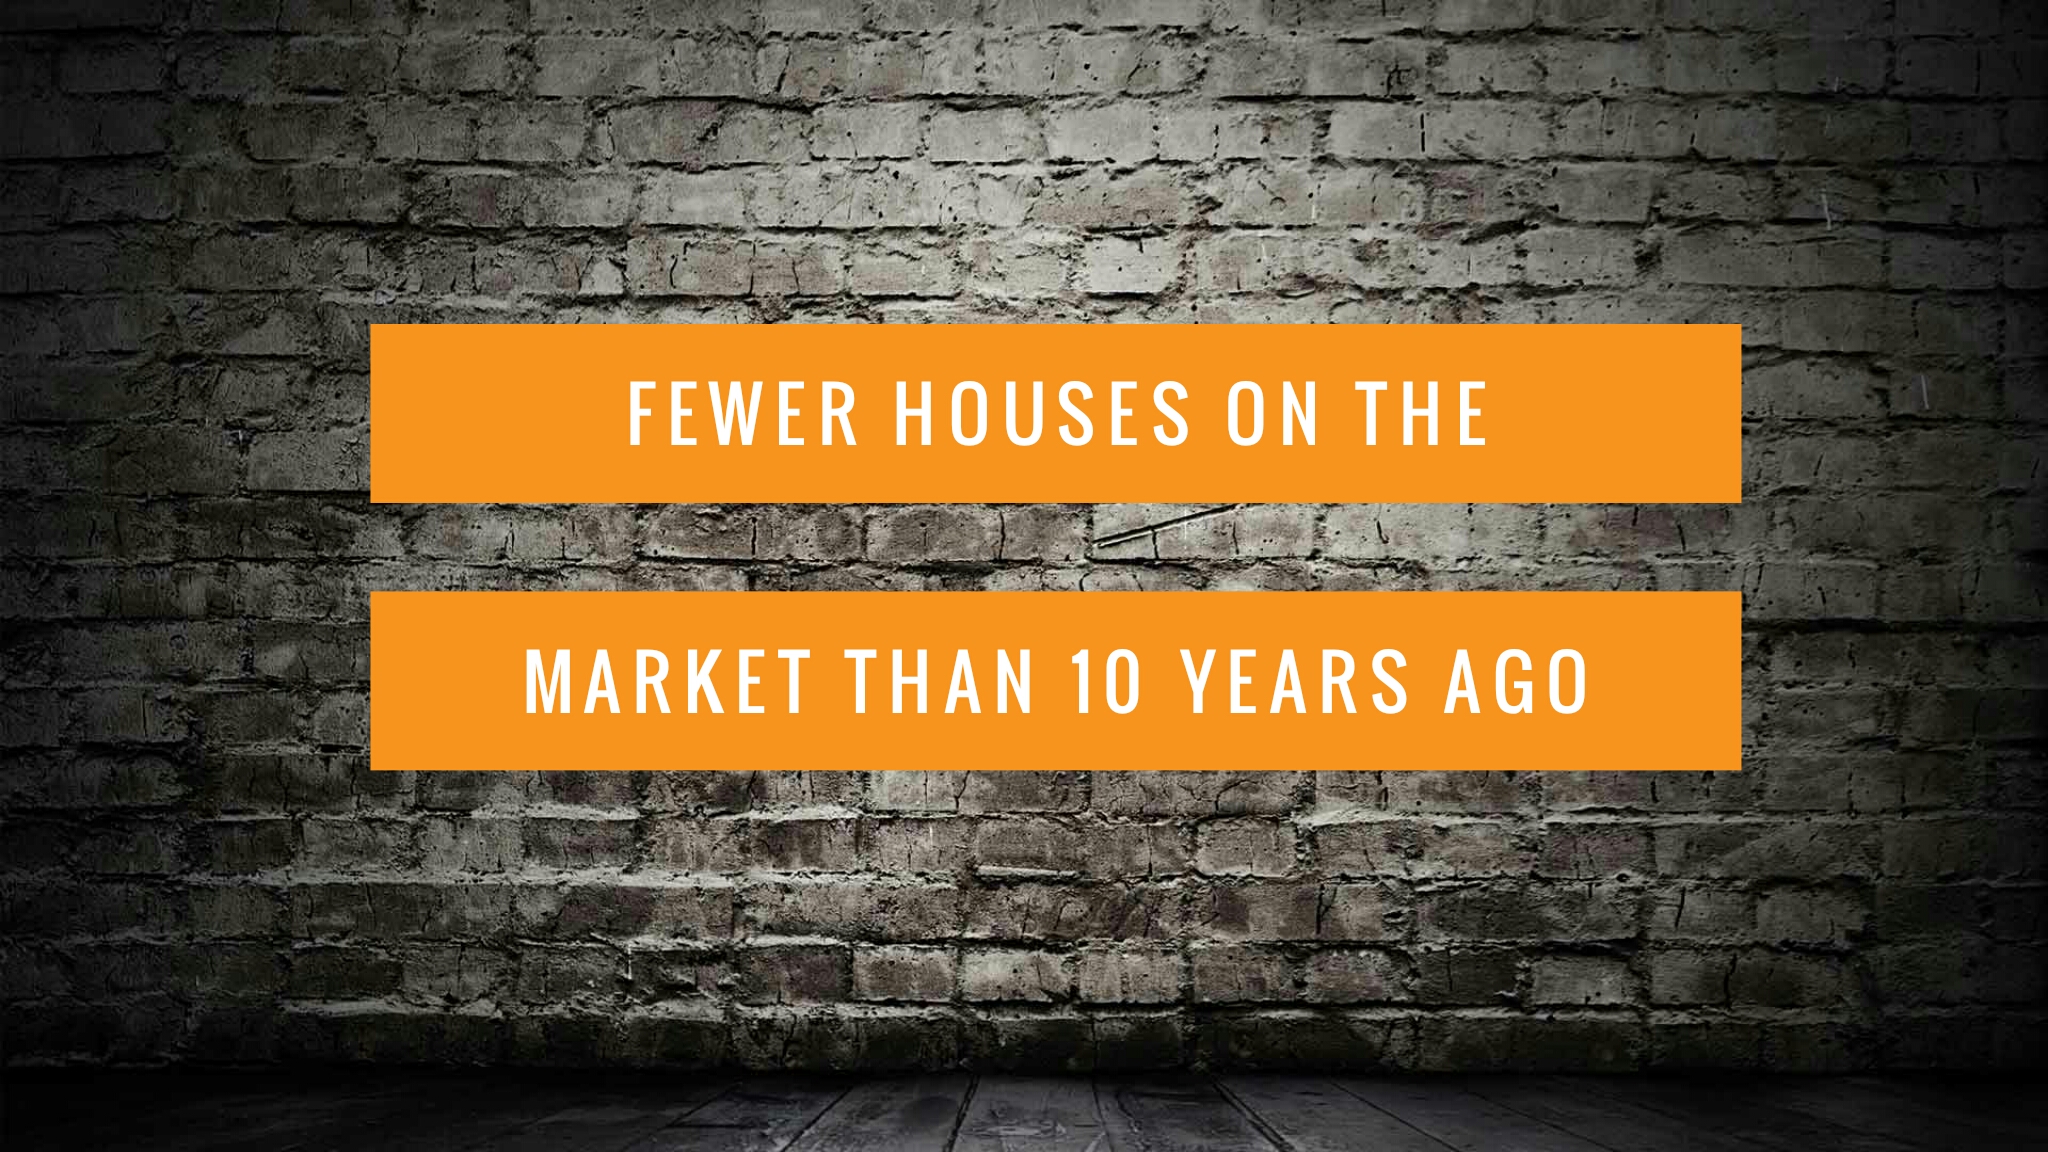 36% Drop in Properties For Sale Today in Telford Compared to 10 Years Ago